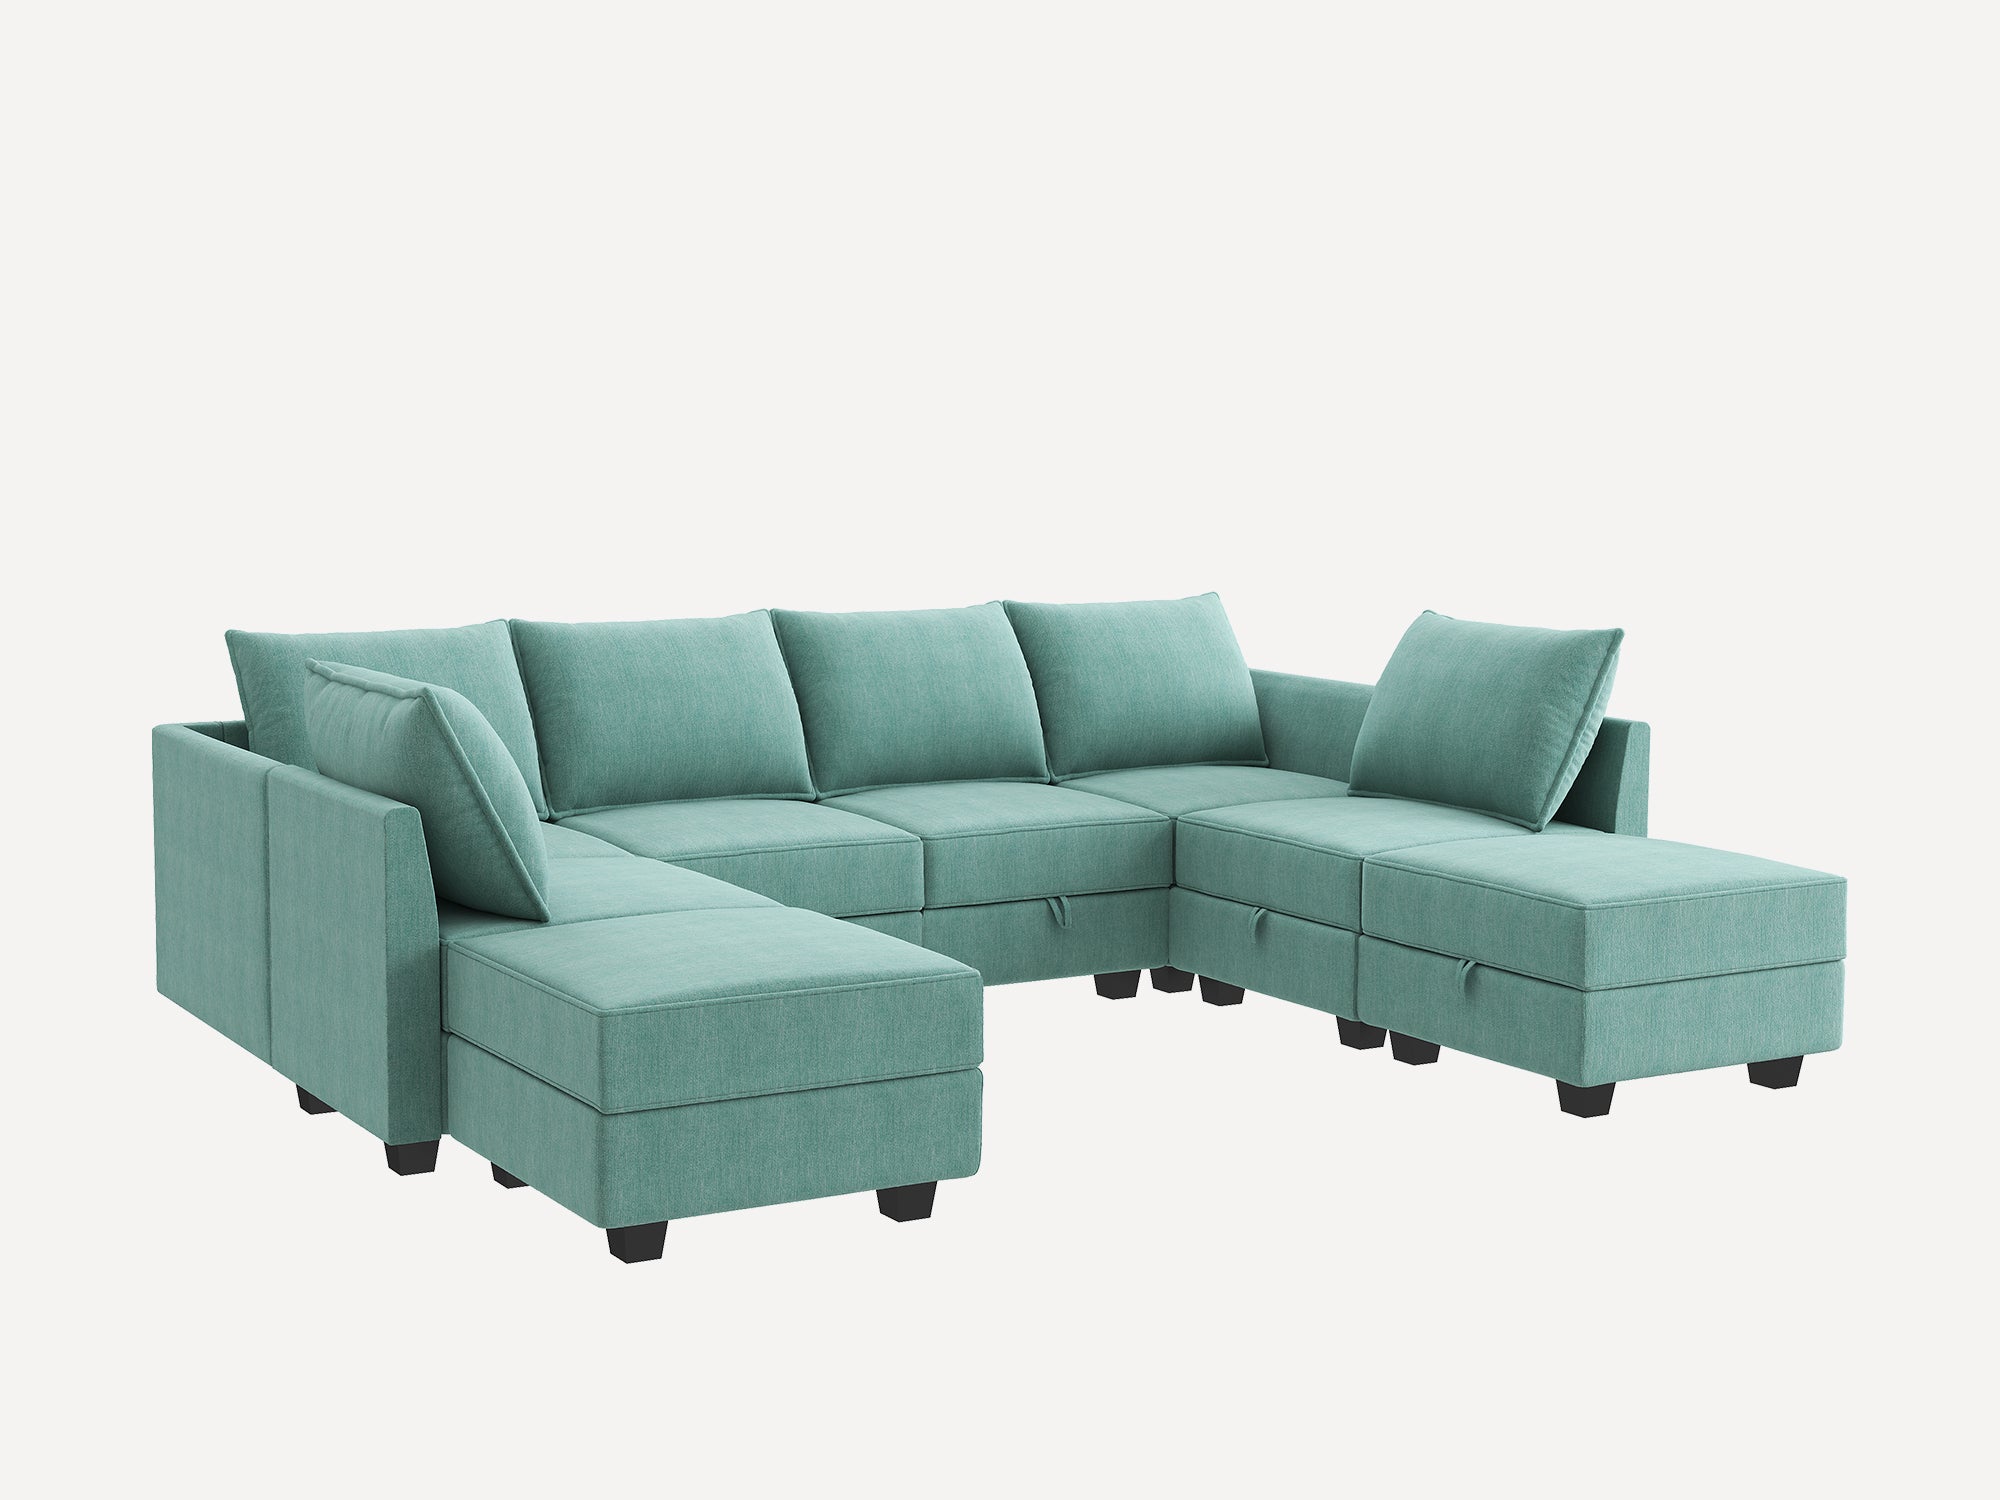 HONBAY Polyester 112.6'' Wide 6-Seater Modular Sectional Sofa Bed Couch with Storage Ottoman#Color_Aqua Blue